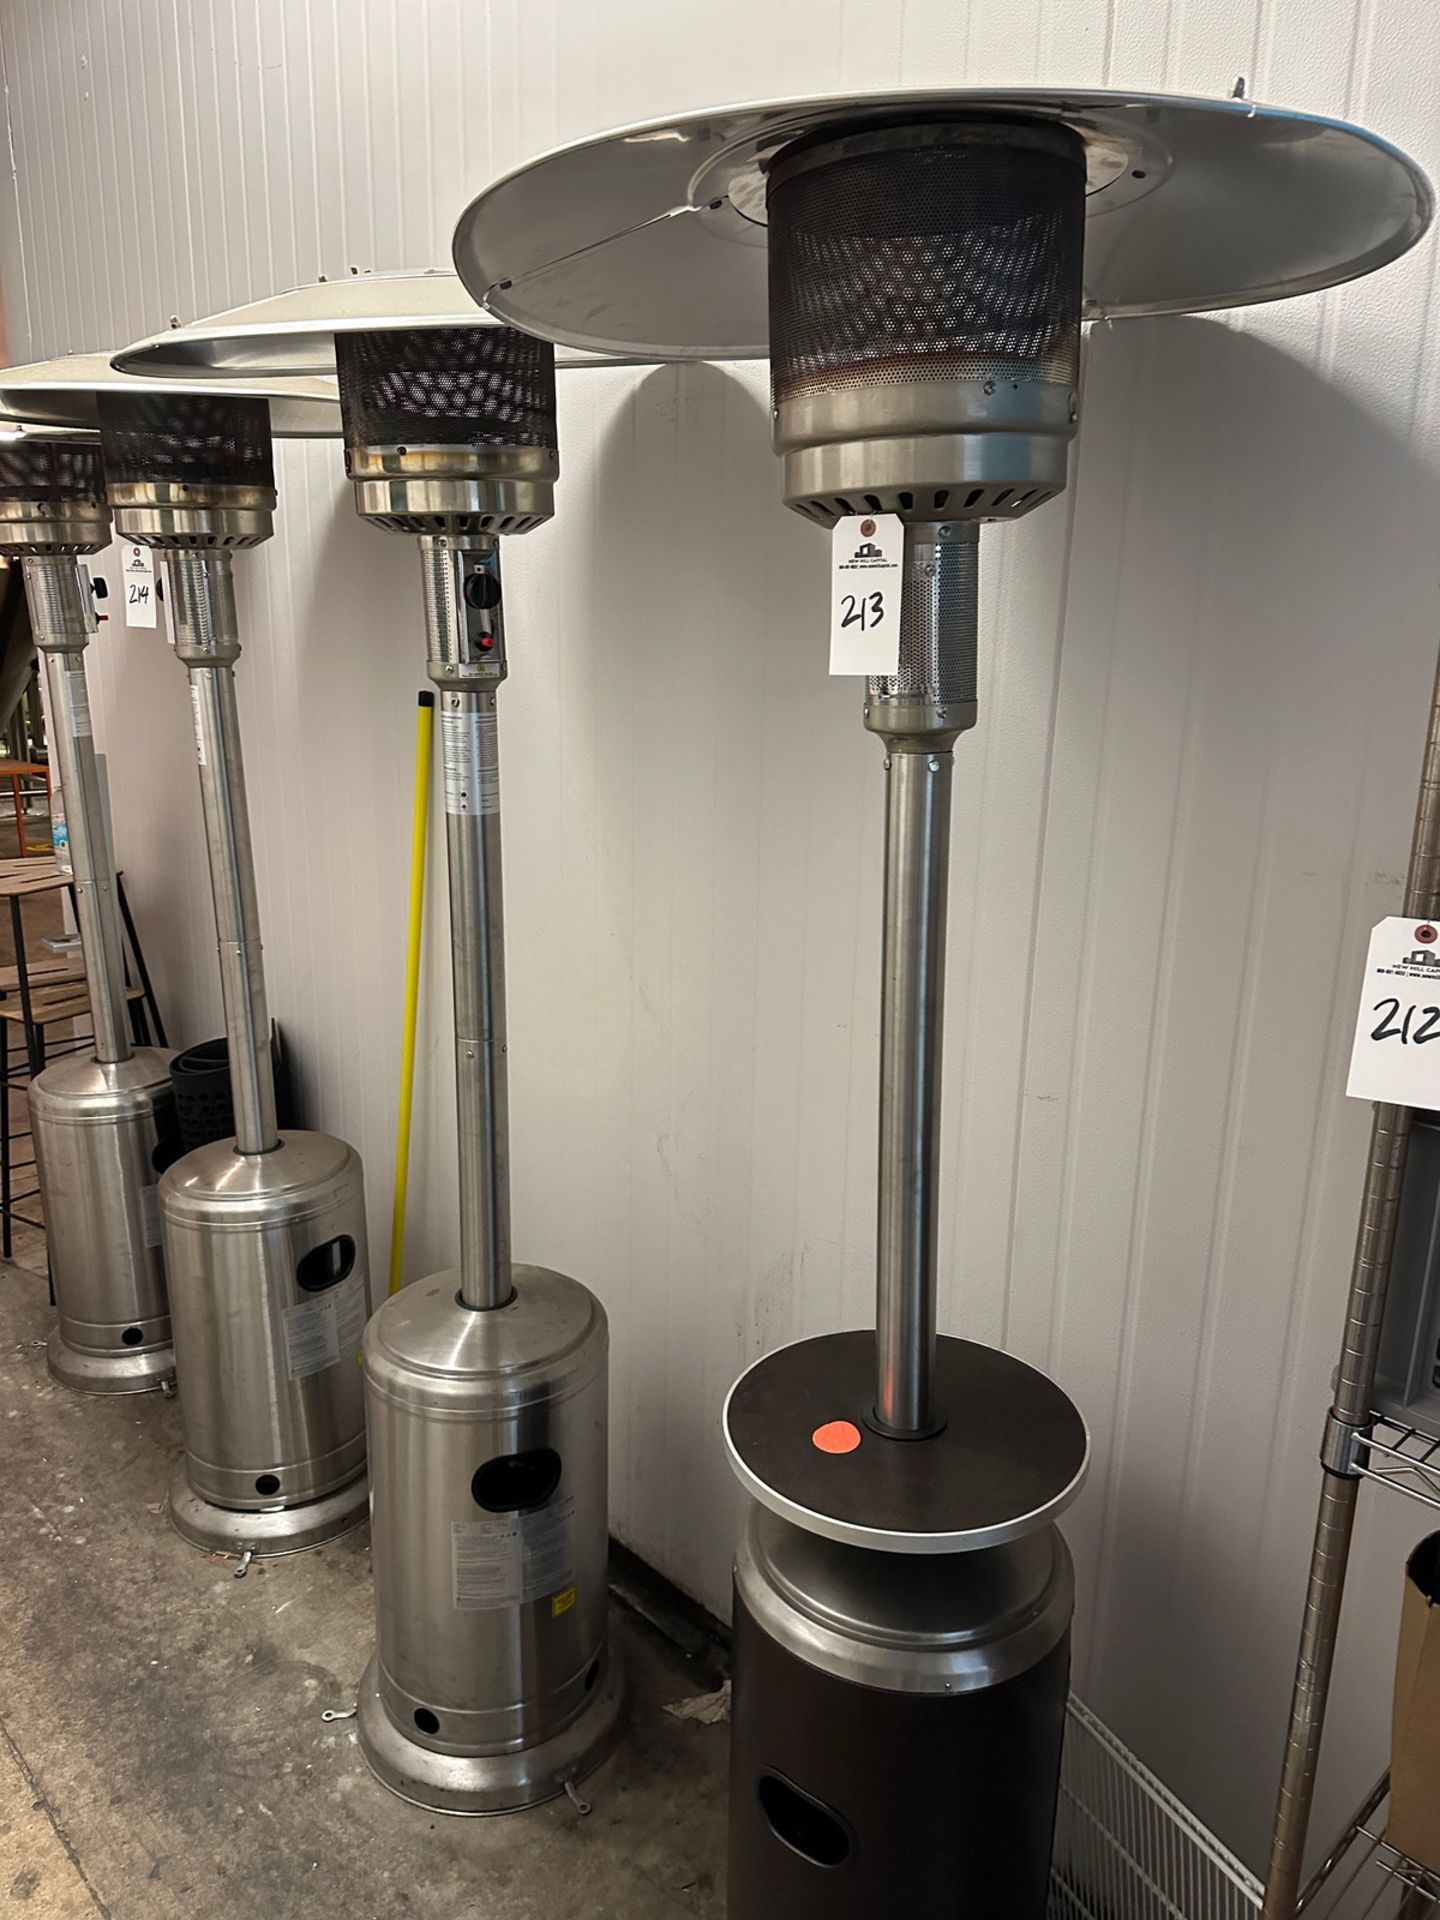 Lot of (2) Outdoor L.P. Patio Heaters | Rig Fee $50